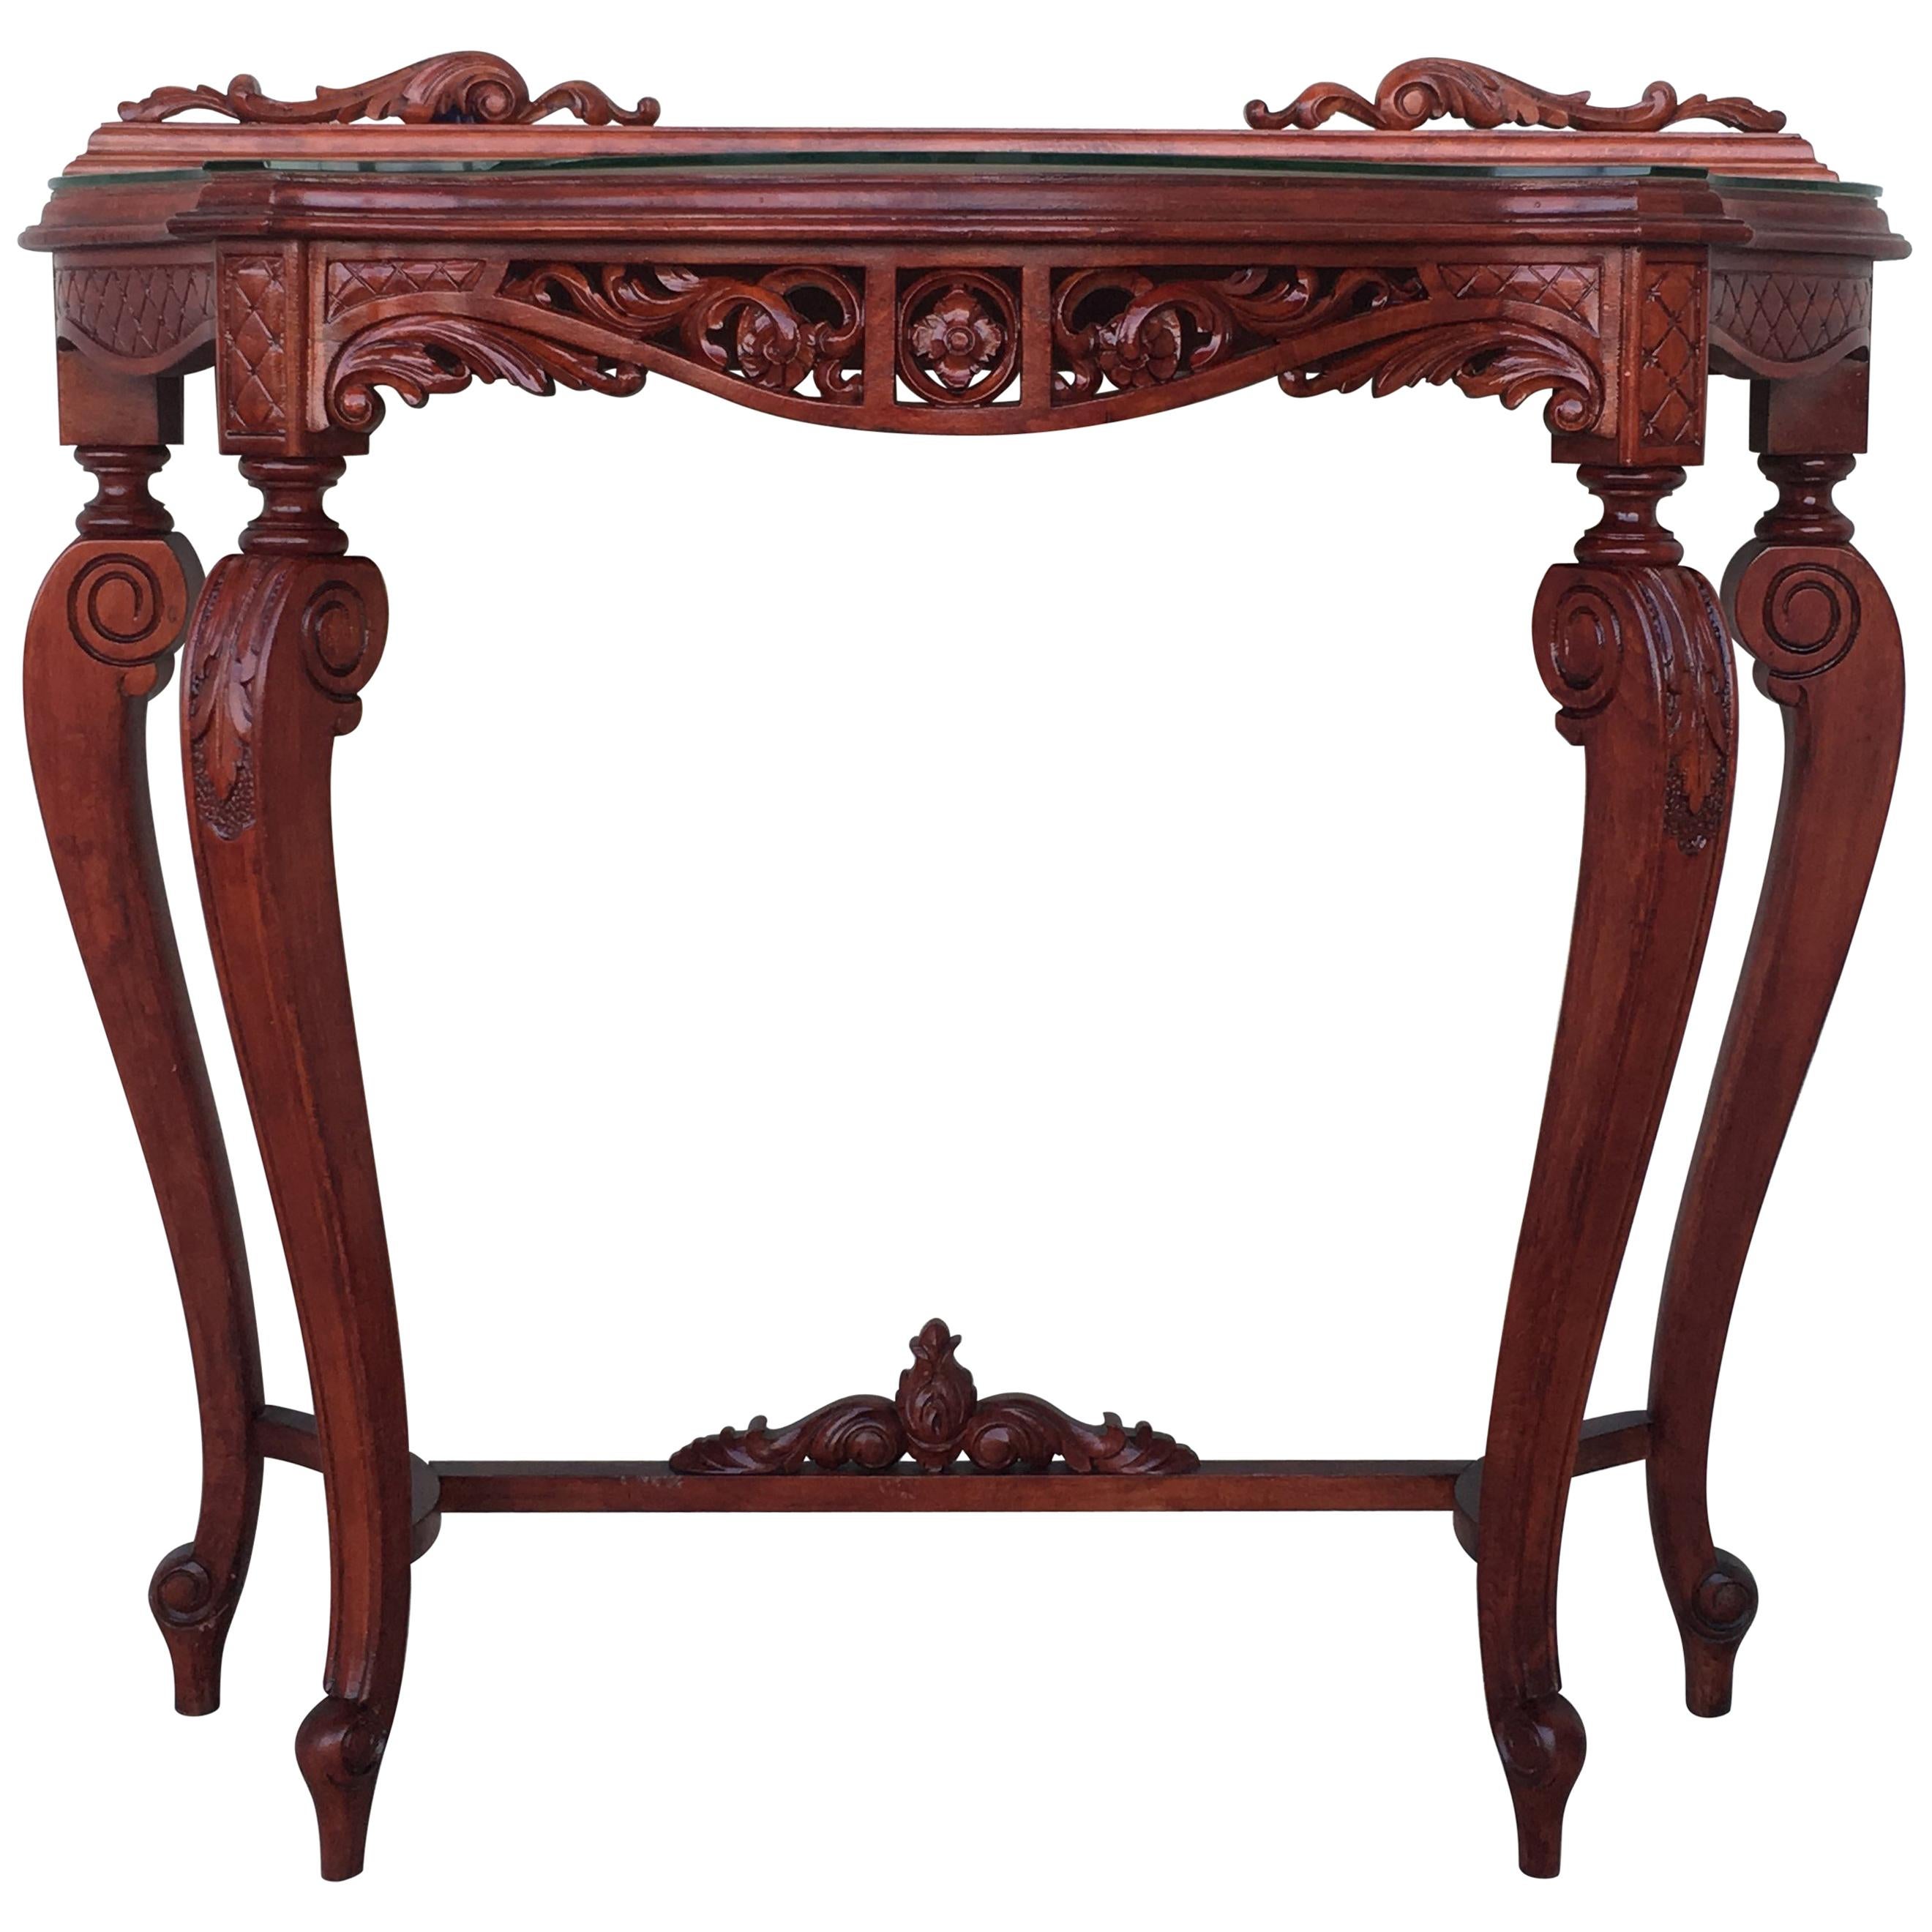 20th Century Fancy Rococo Style Italian Carved Mahogany and Glass-Top Console